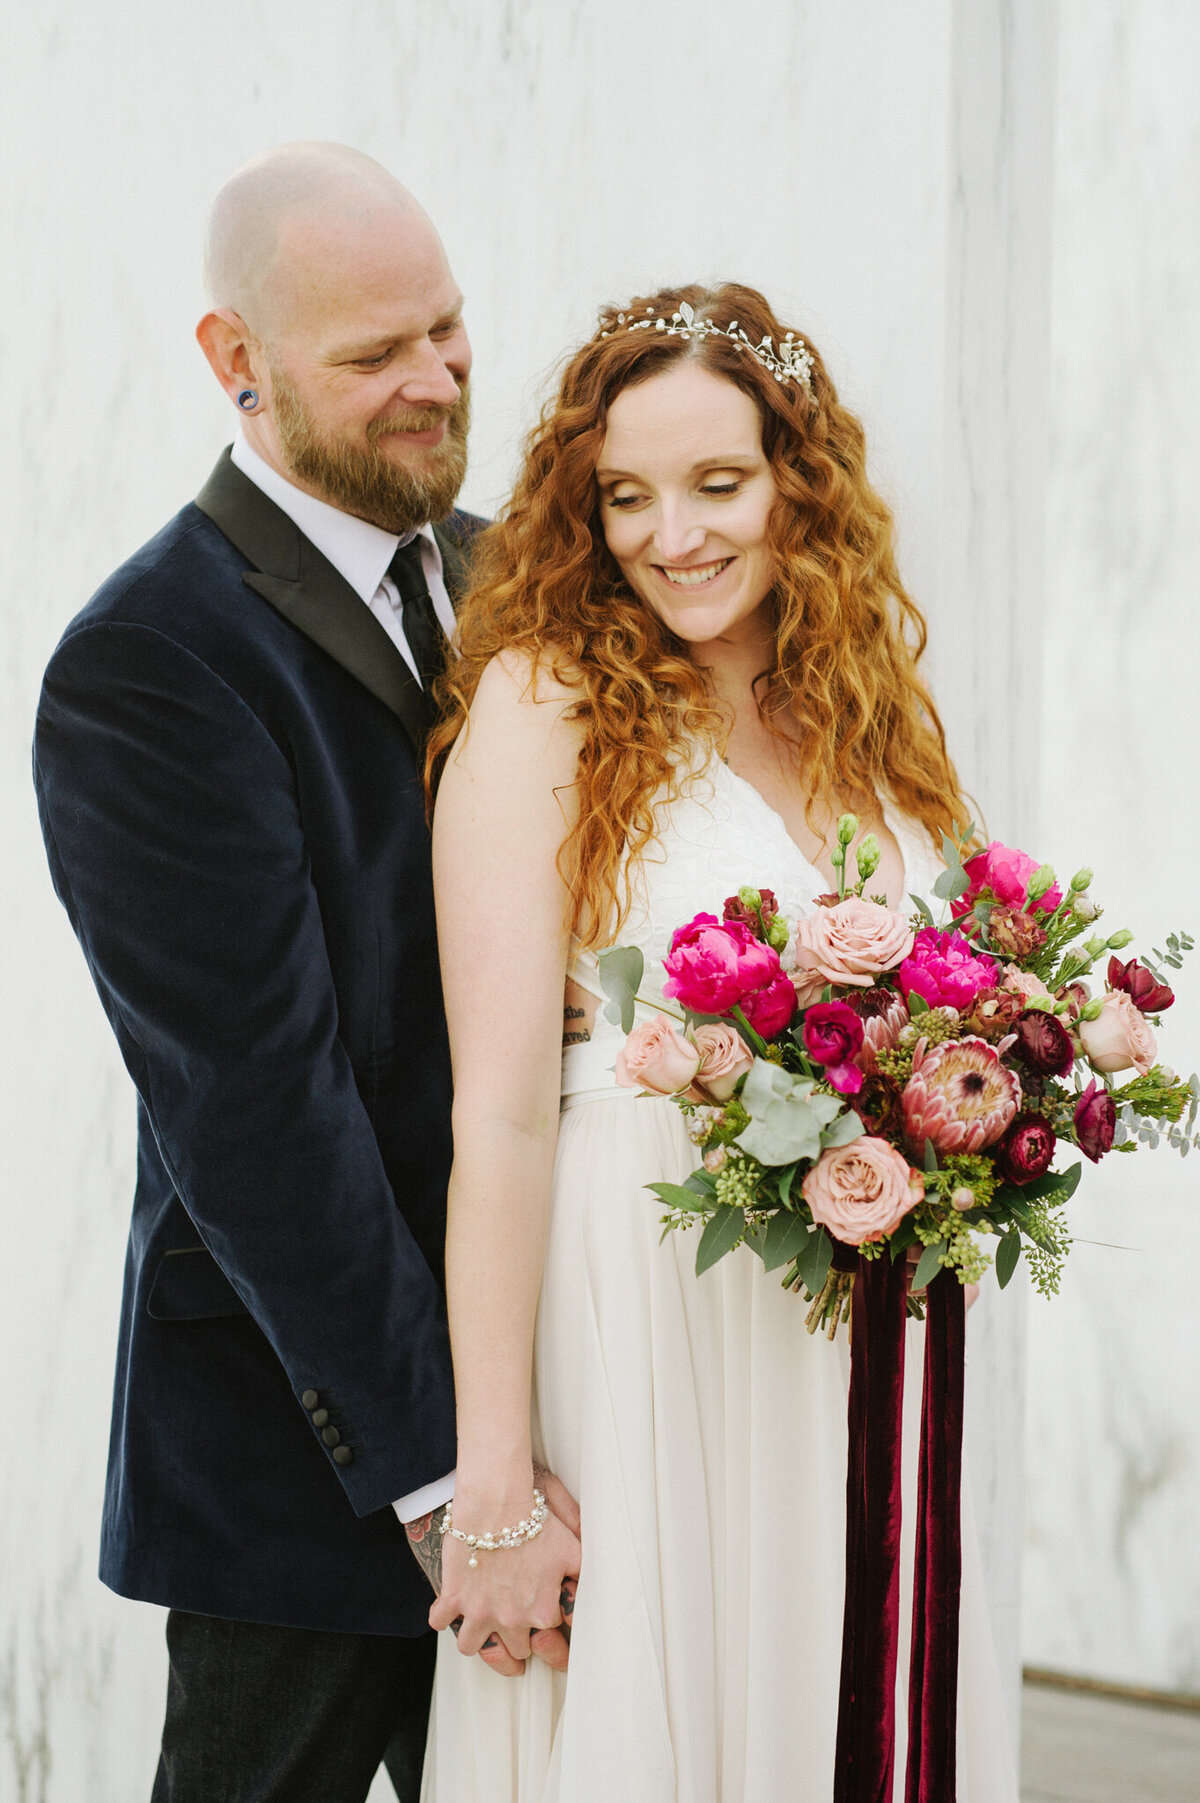 Bride and groom holding hands, gorgeous orange hair with stunning bridal hairpiece, holding bright pink and fuchia bouquet, captured by Christy D. Swanberg Photography, editorial elopement and wedding photographer in Calgary, Alberta, featured on the Bronte Bride Vendor Guide.